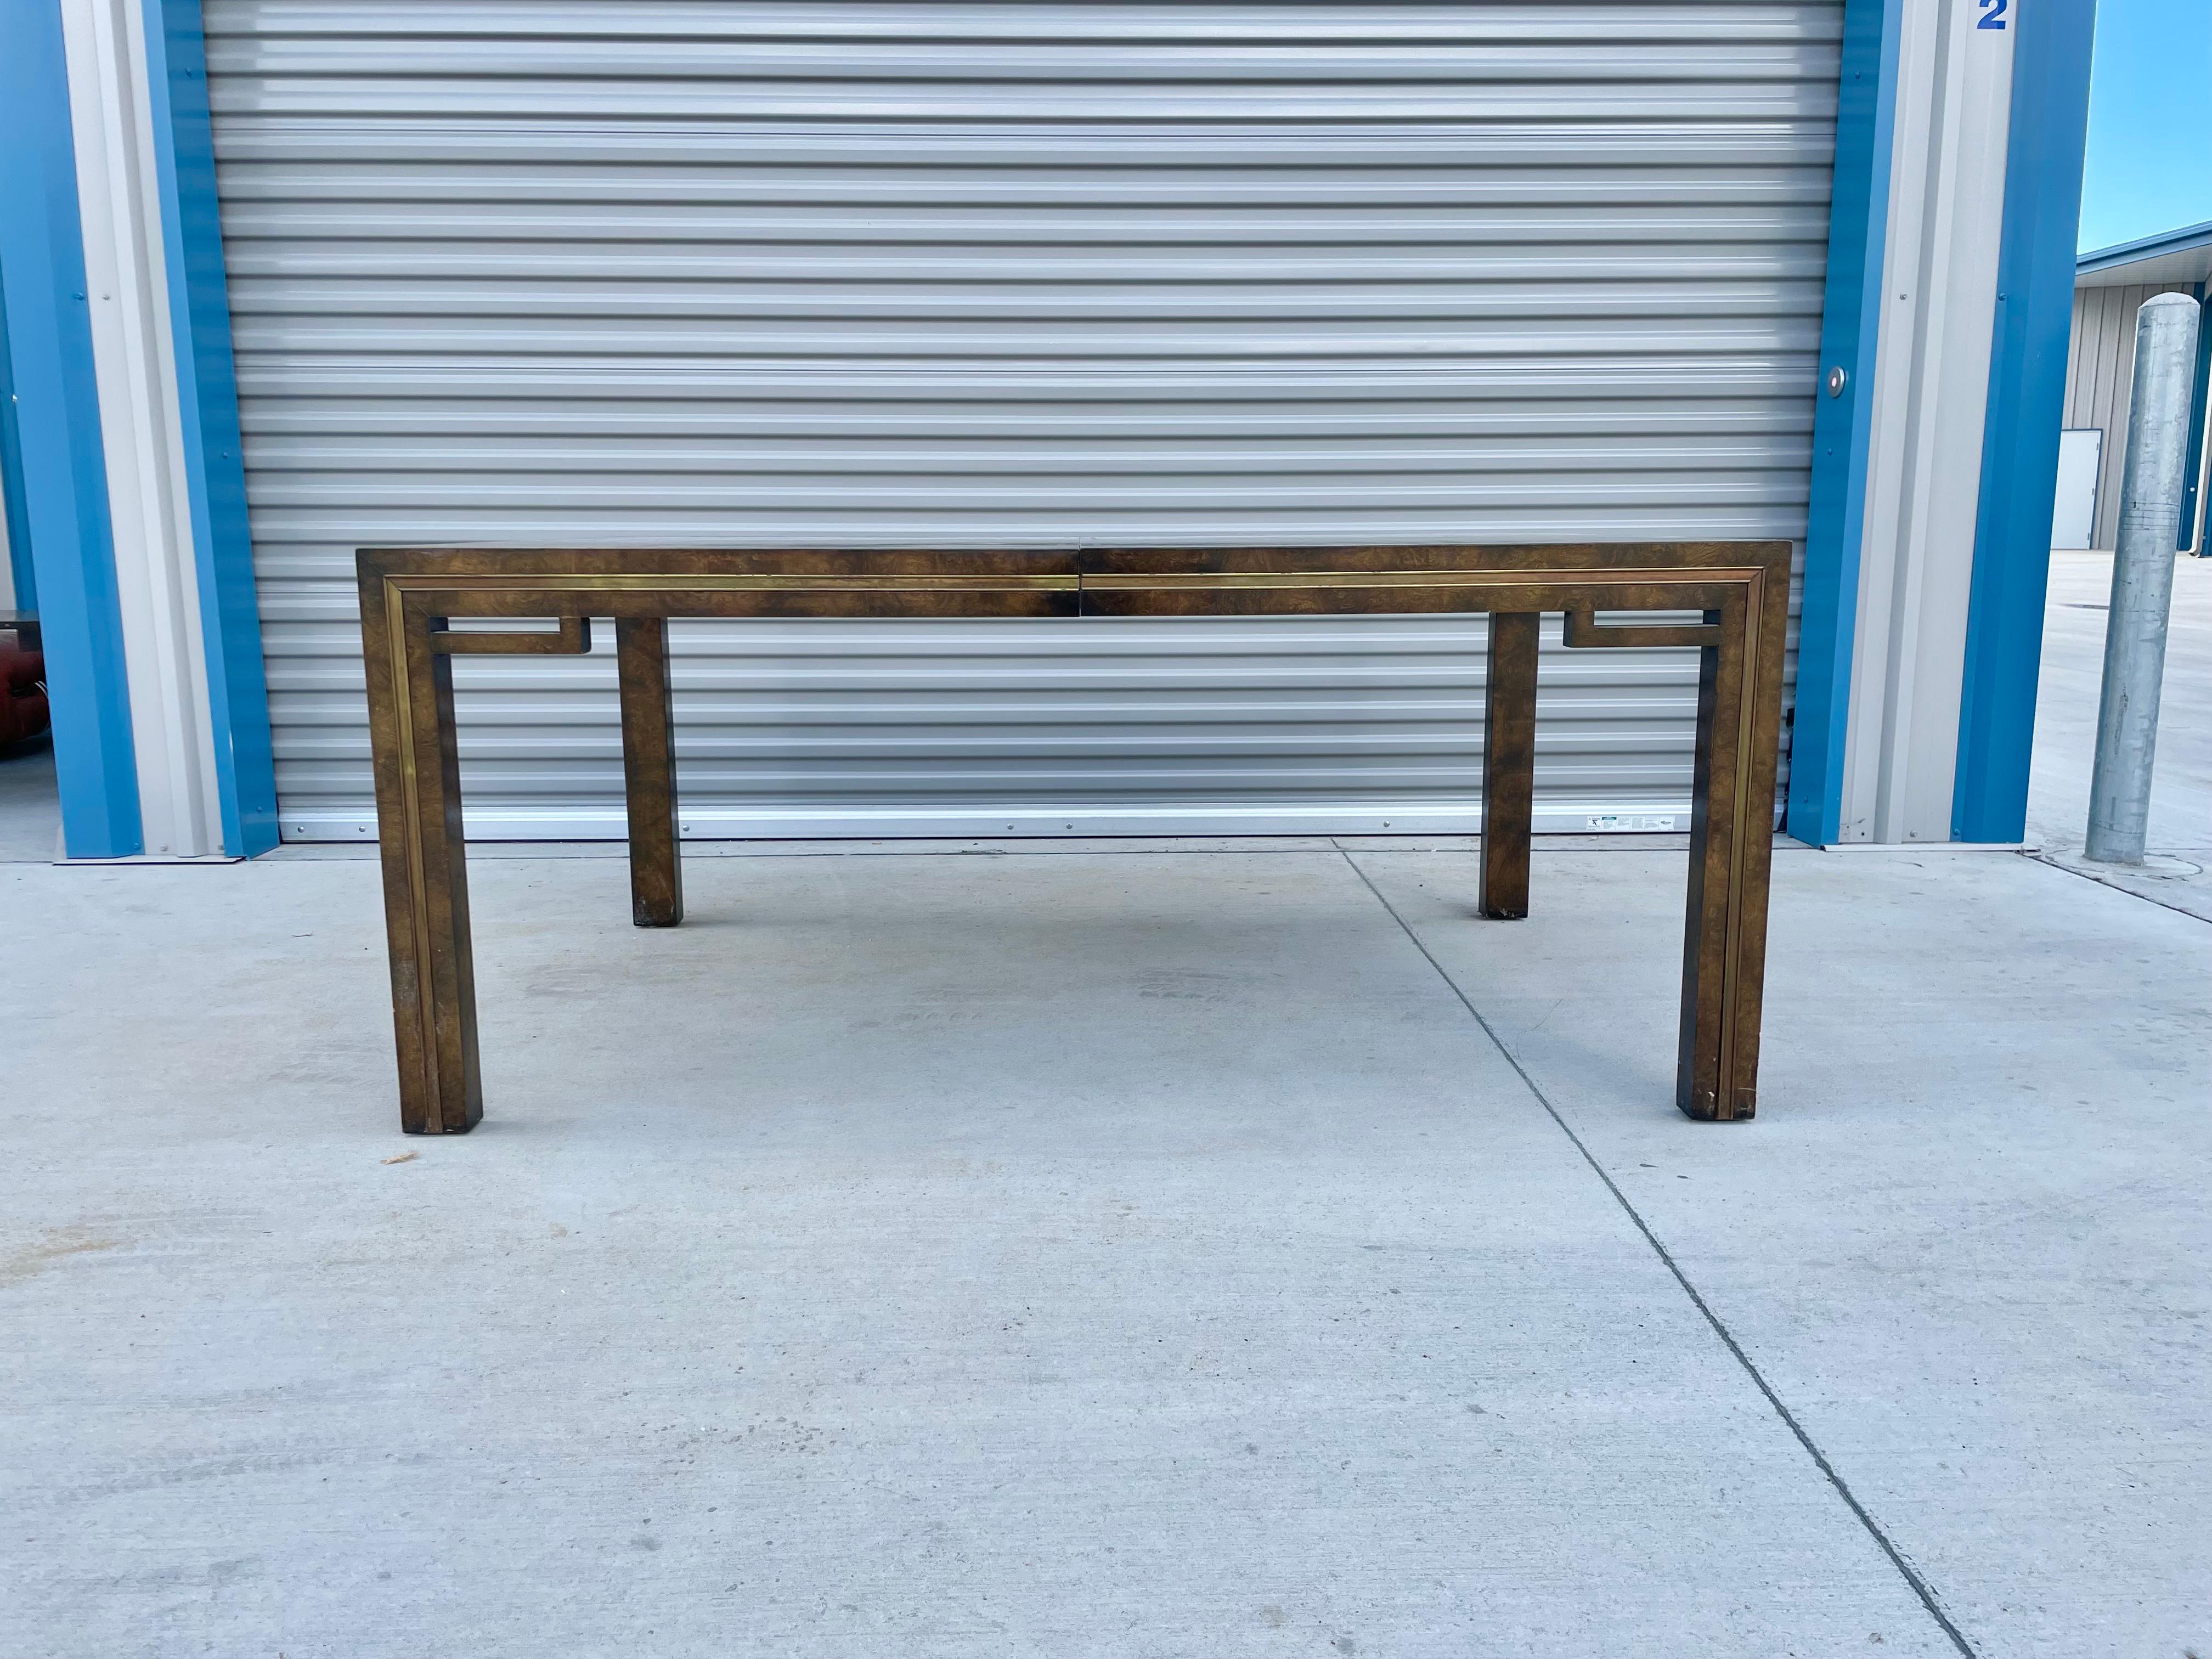 Midcentury burlwood dining table designed by William Doezema and manufactured by Mastercraft in the United States circa 1970s. This beautiful dining table features a burlwood frame with a brass strip around the table. The dining table also has two